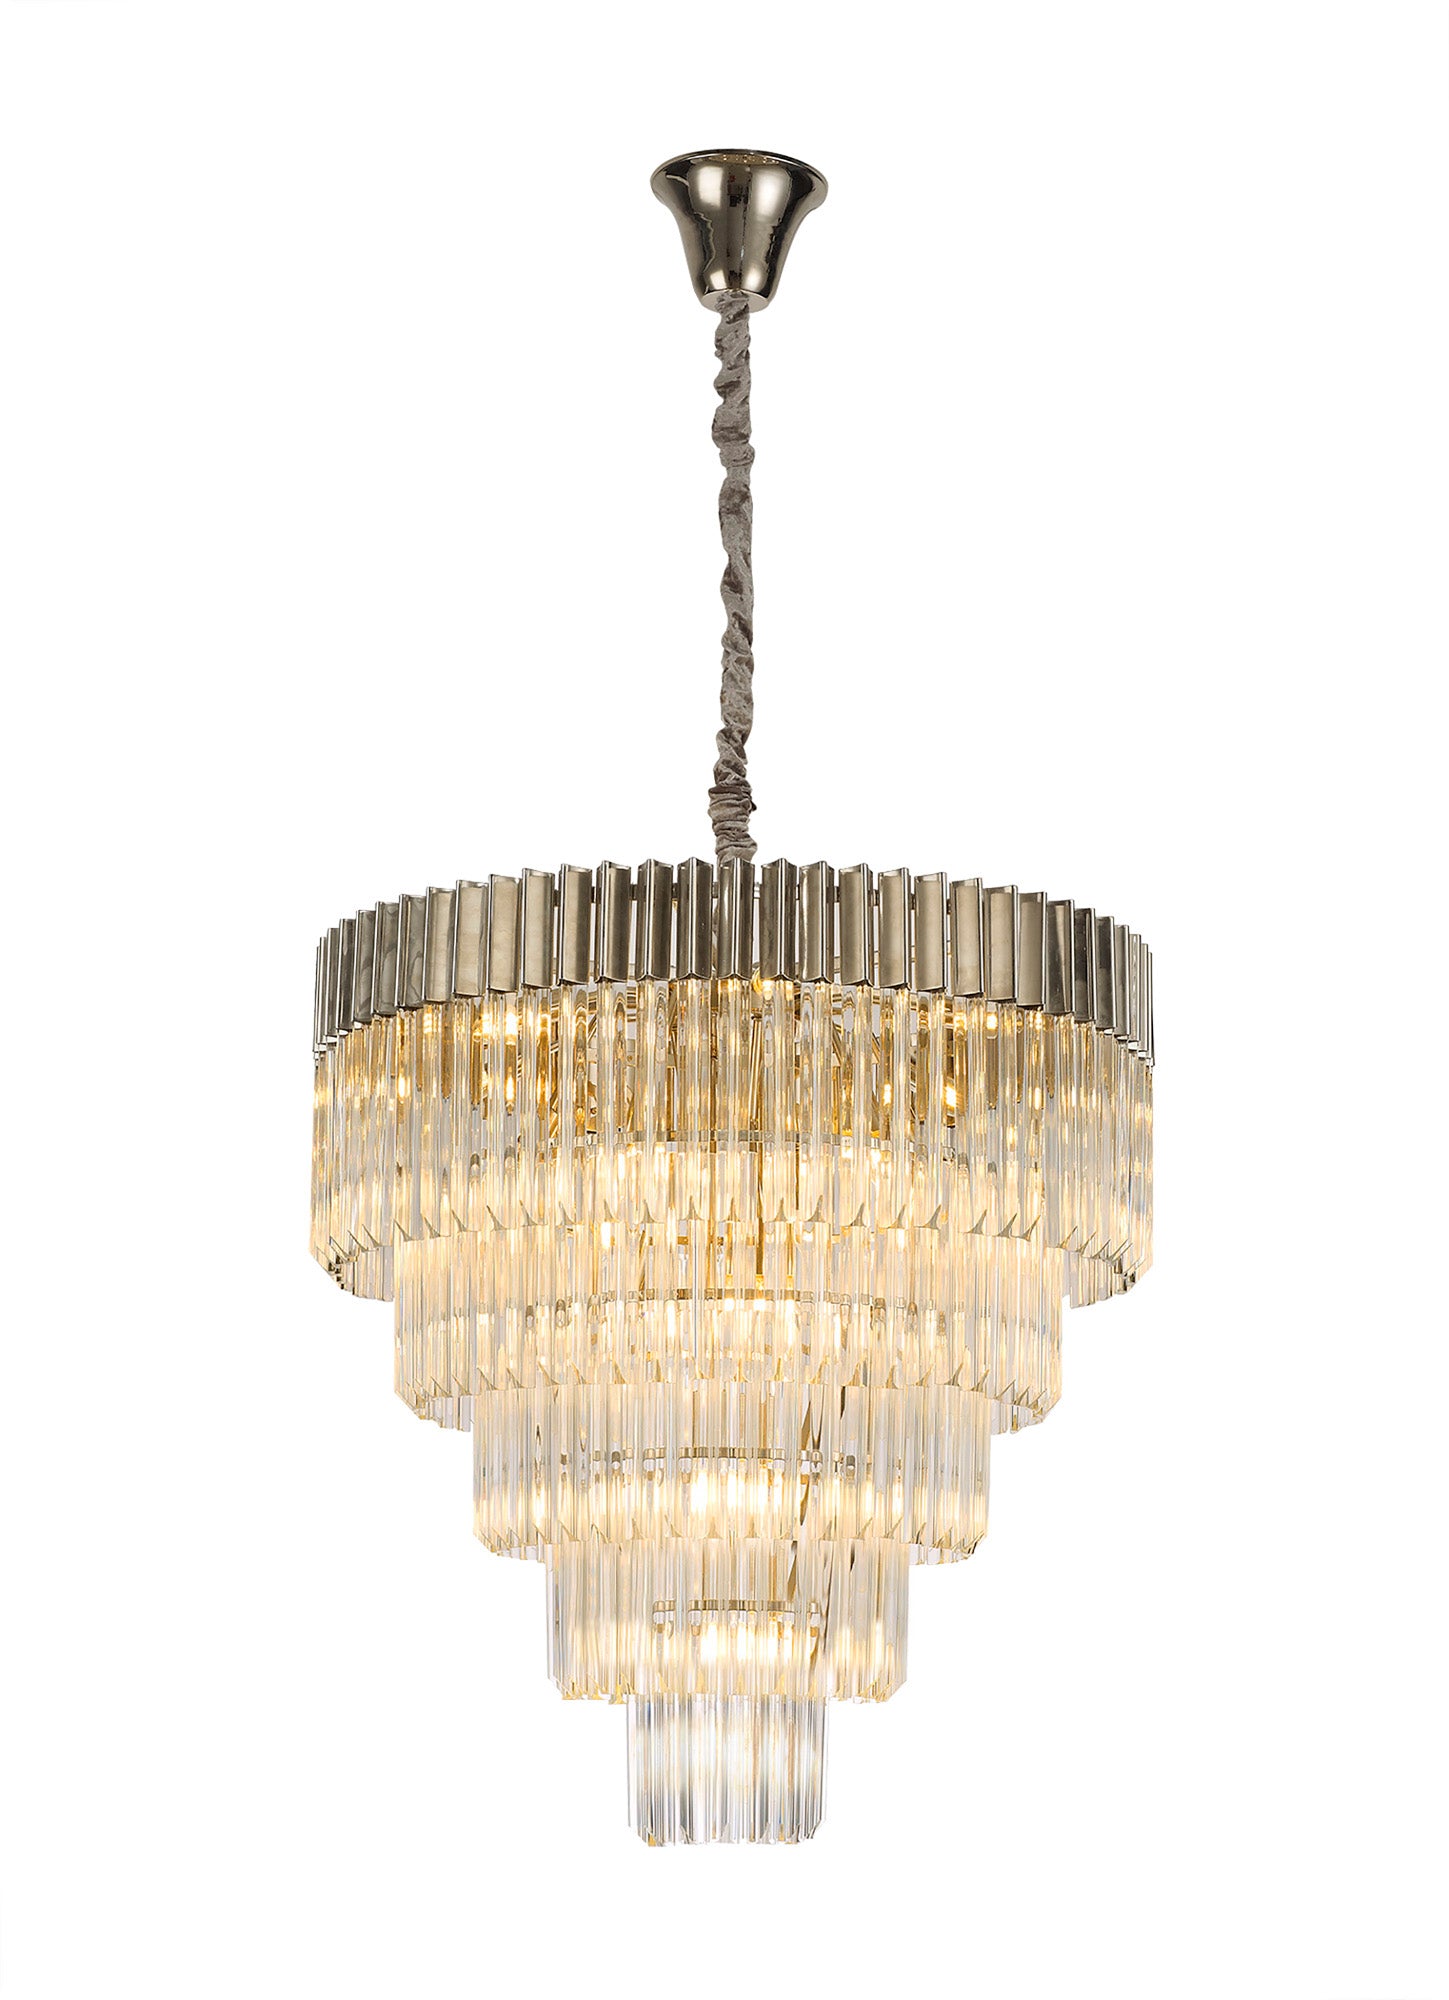 Knightsbridge Pendant Round 5 Tier 18 Light E14, Polished Nickel/Clear Glass - LO173723. Item Weight: 30.2kg